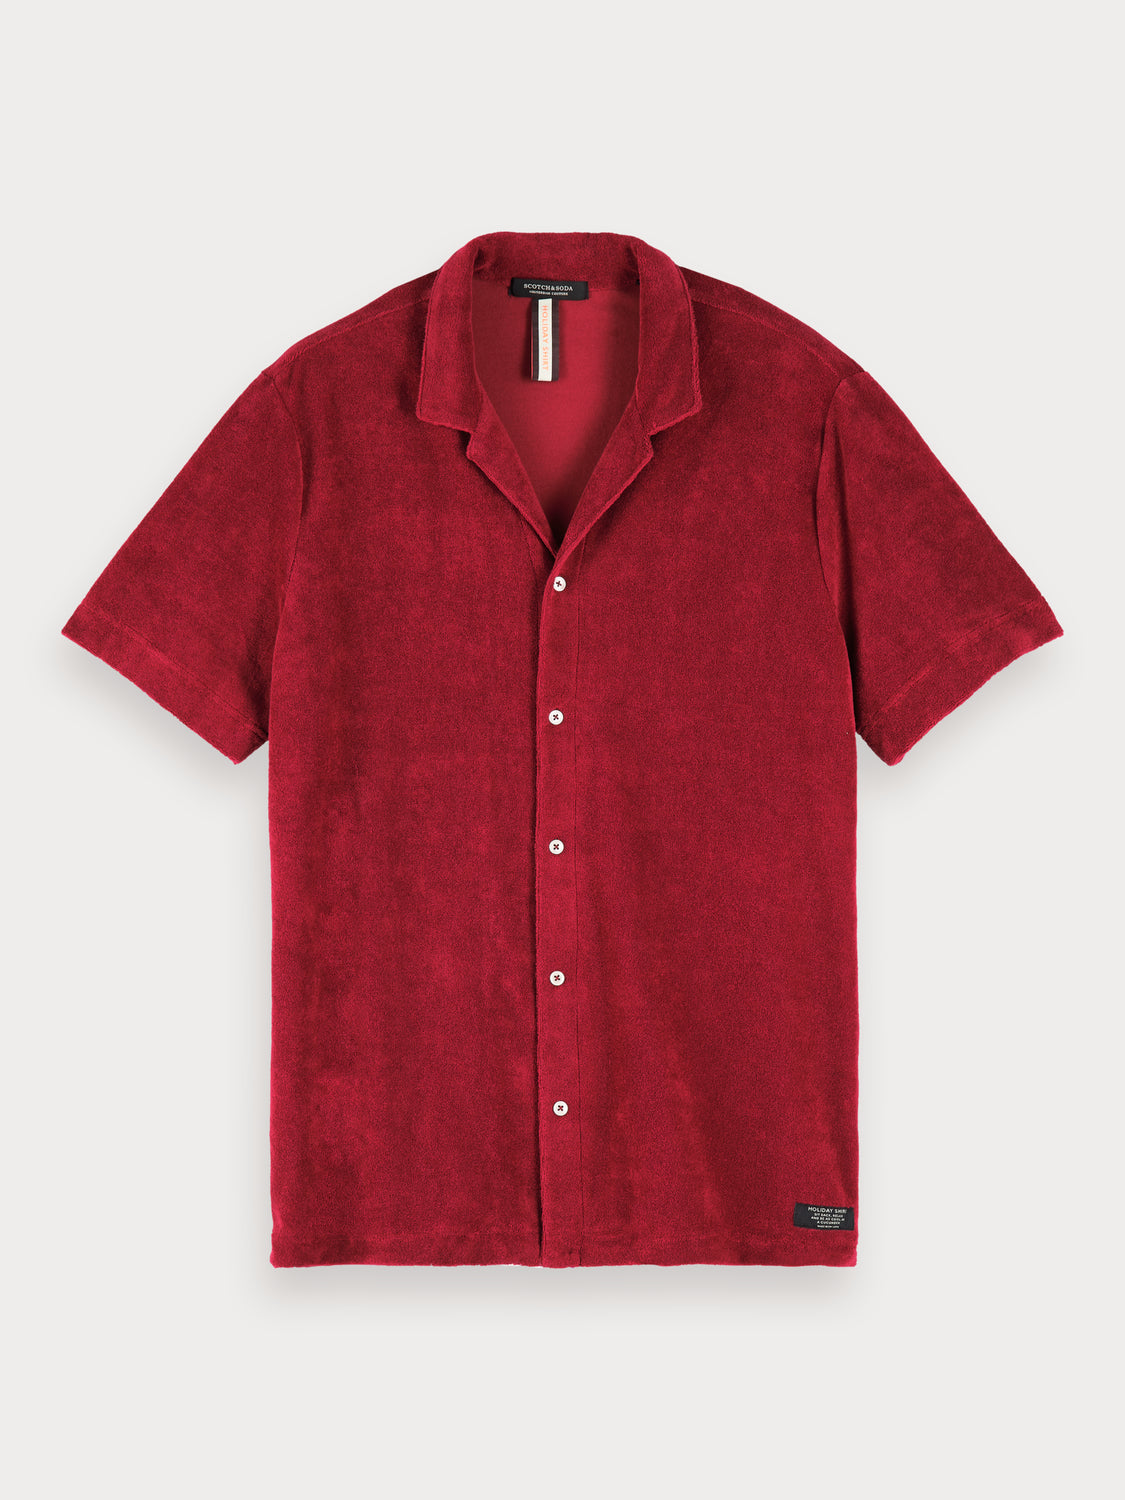 Scotch and Soda | Short Sleeved Towel Shirt in Red | Scotch Select